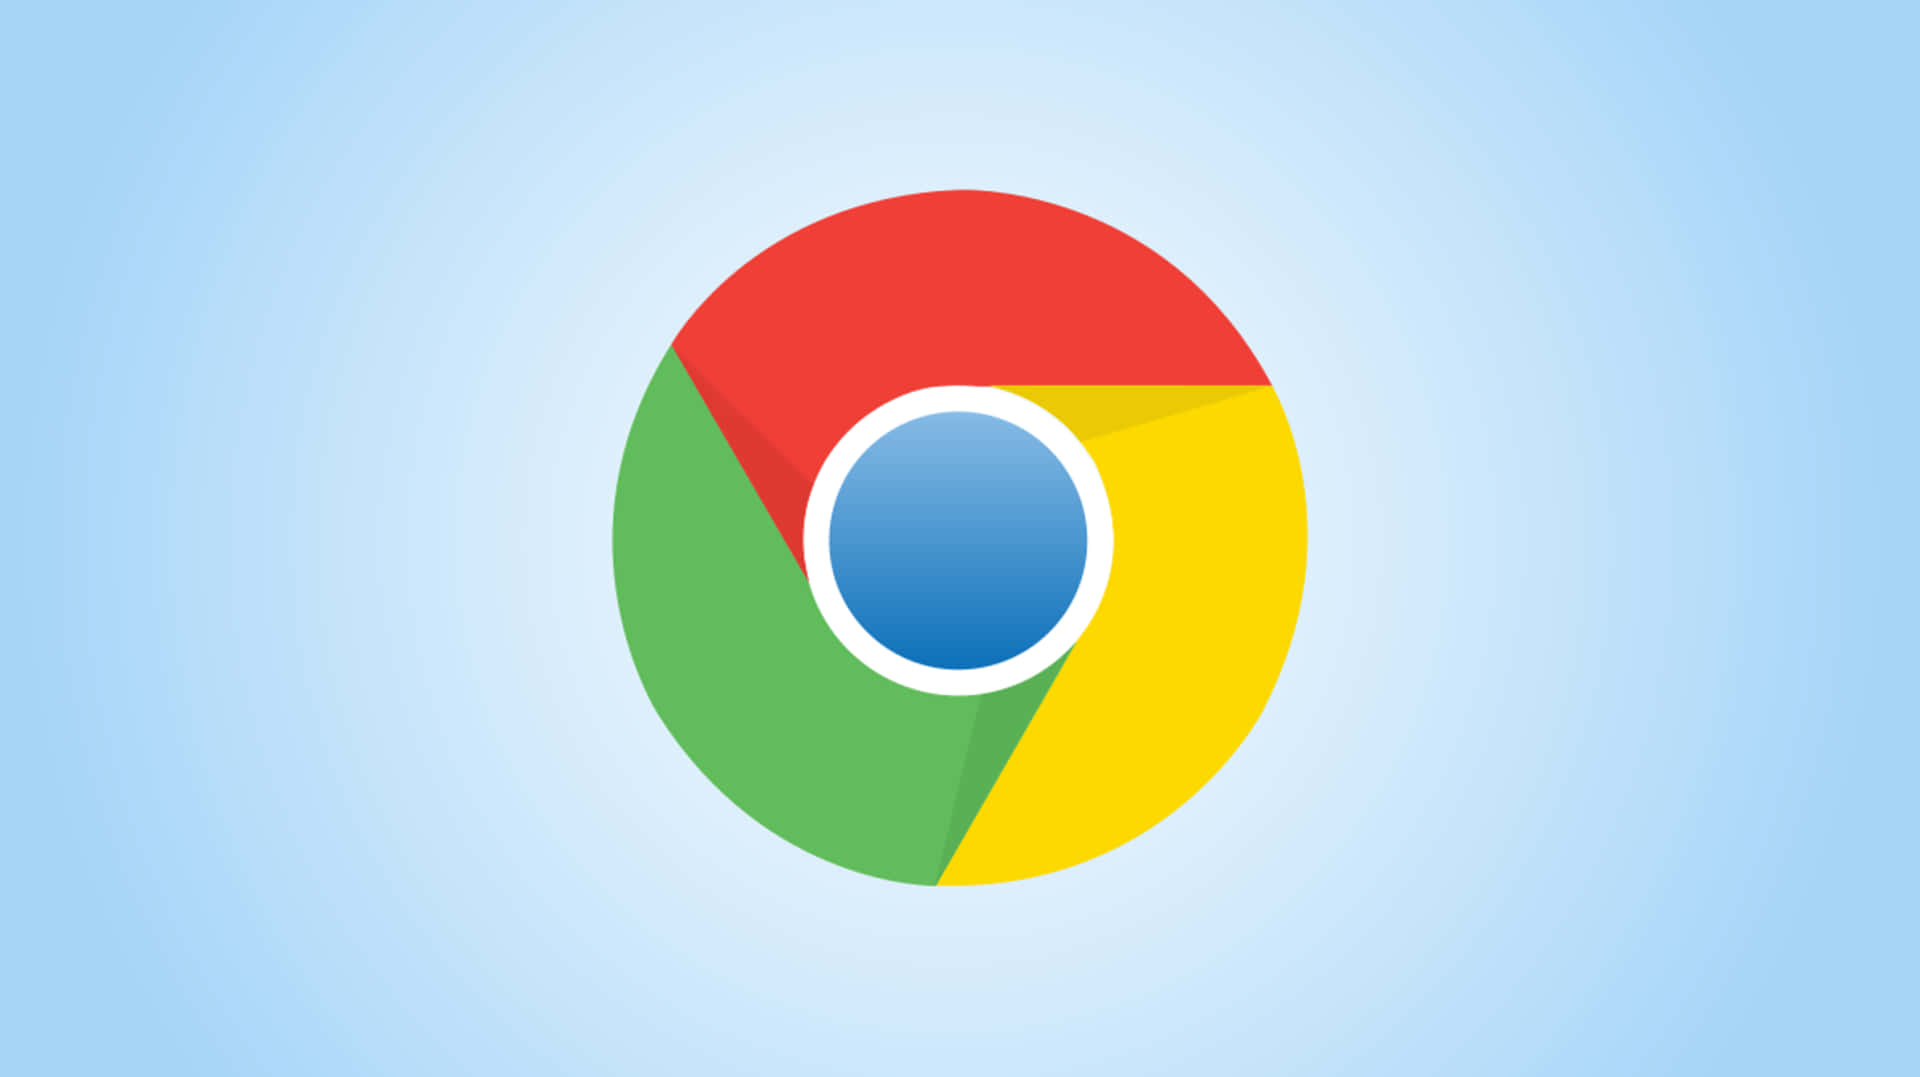 Download Google Chrome Browser | Wallpapers.com